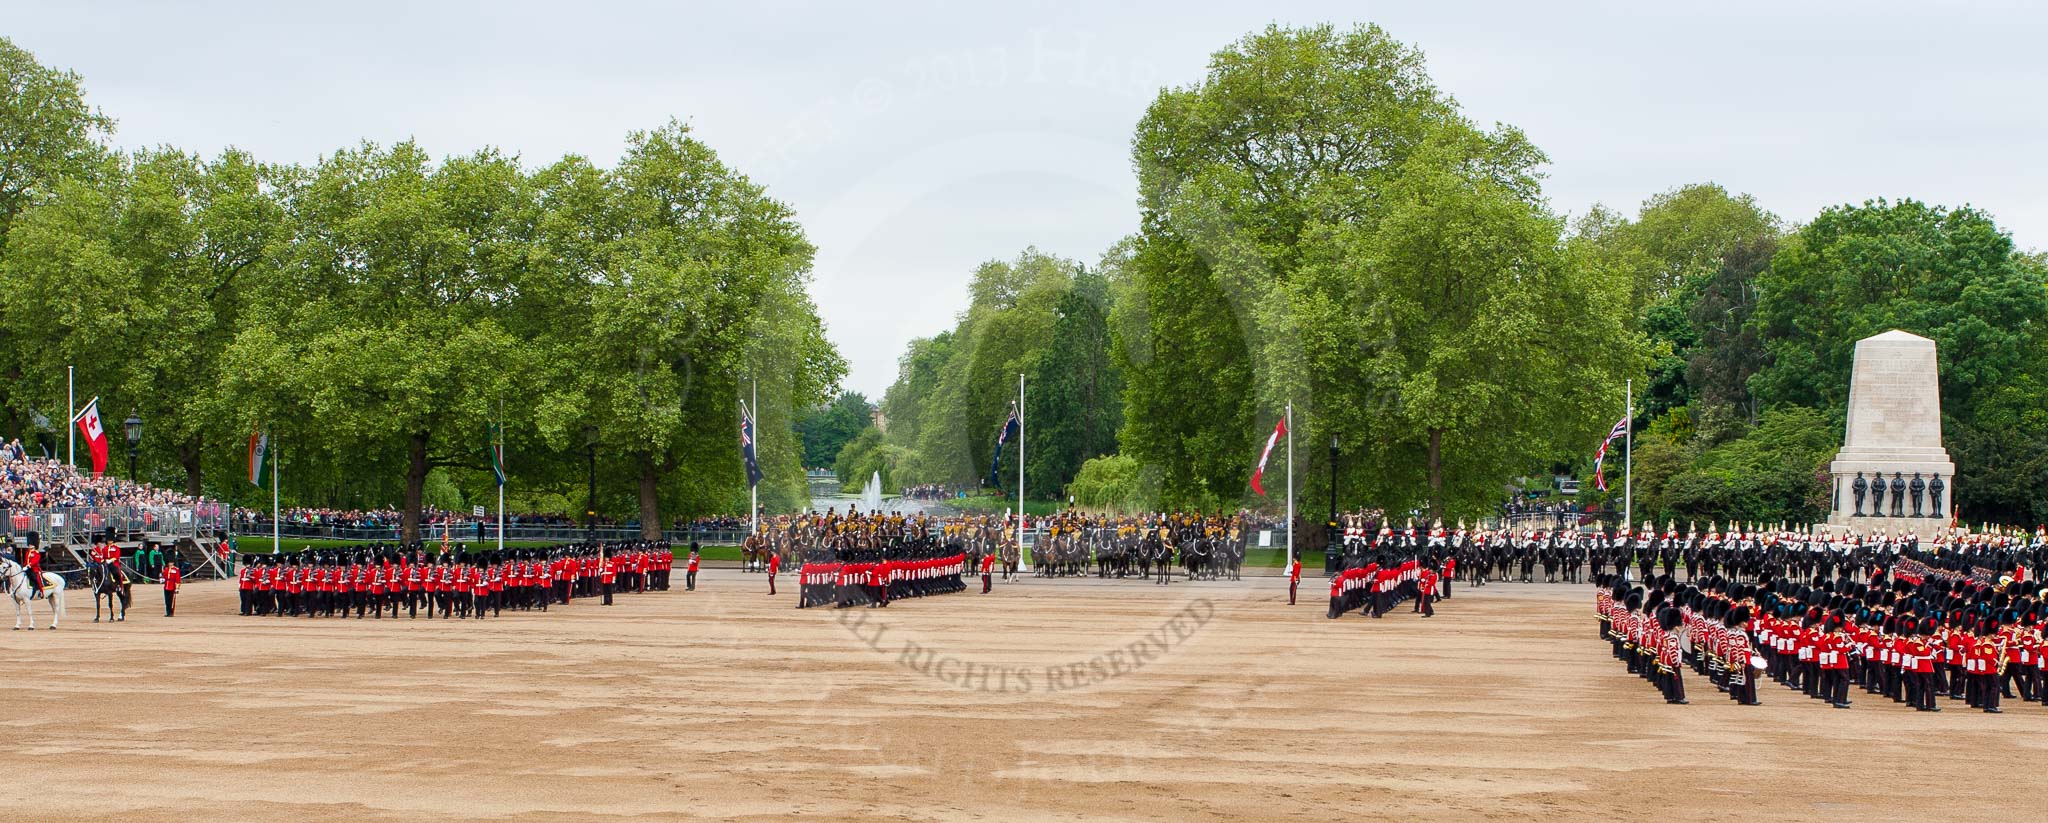 Major General's Review 2013: The March Past in Slow Time - Field Officer and Major of the Parade leading the six guards around Horse Guards Parade..
Horse Guards Parade, Westminster,
London SW1,

United Kingdom,
on 01 June 2013 at 11:30, image #464